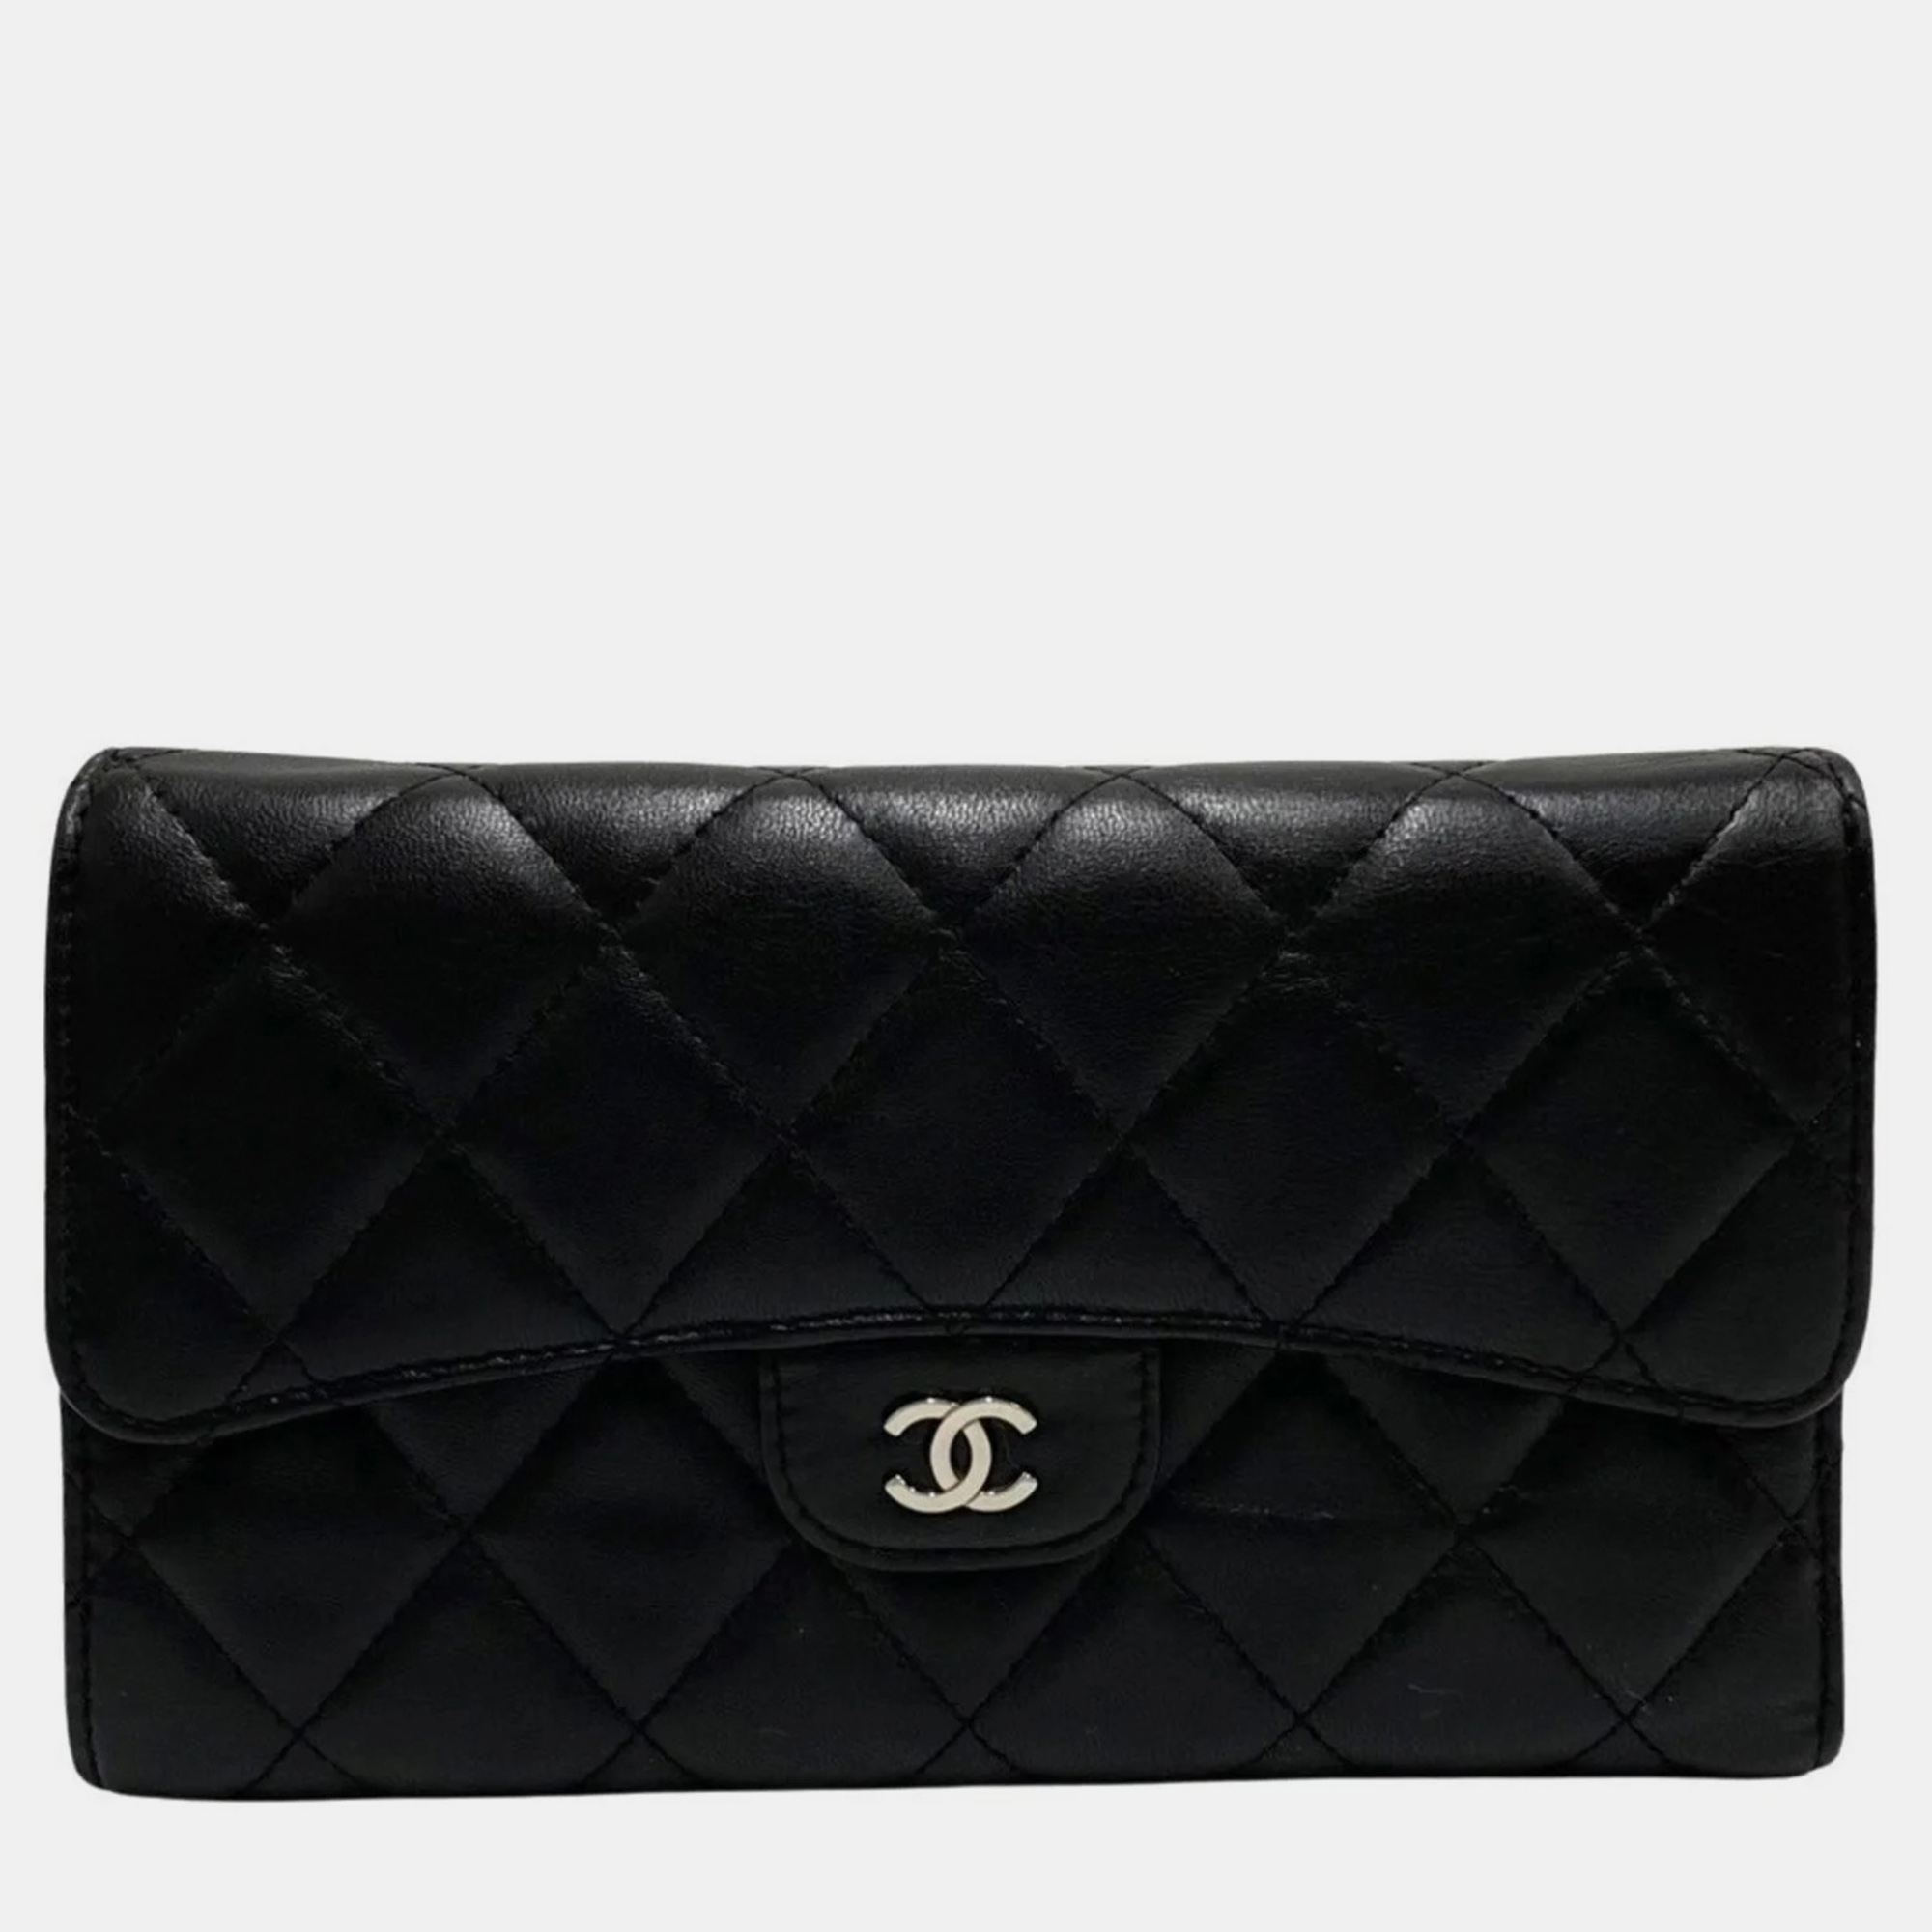 Chanel chanle black leather quilted lamskin long l flap wallet